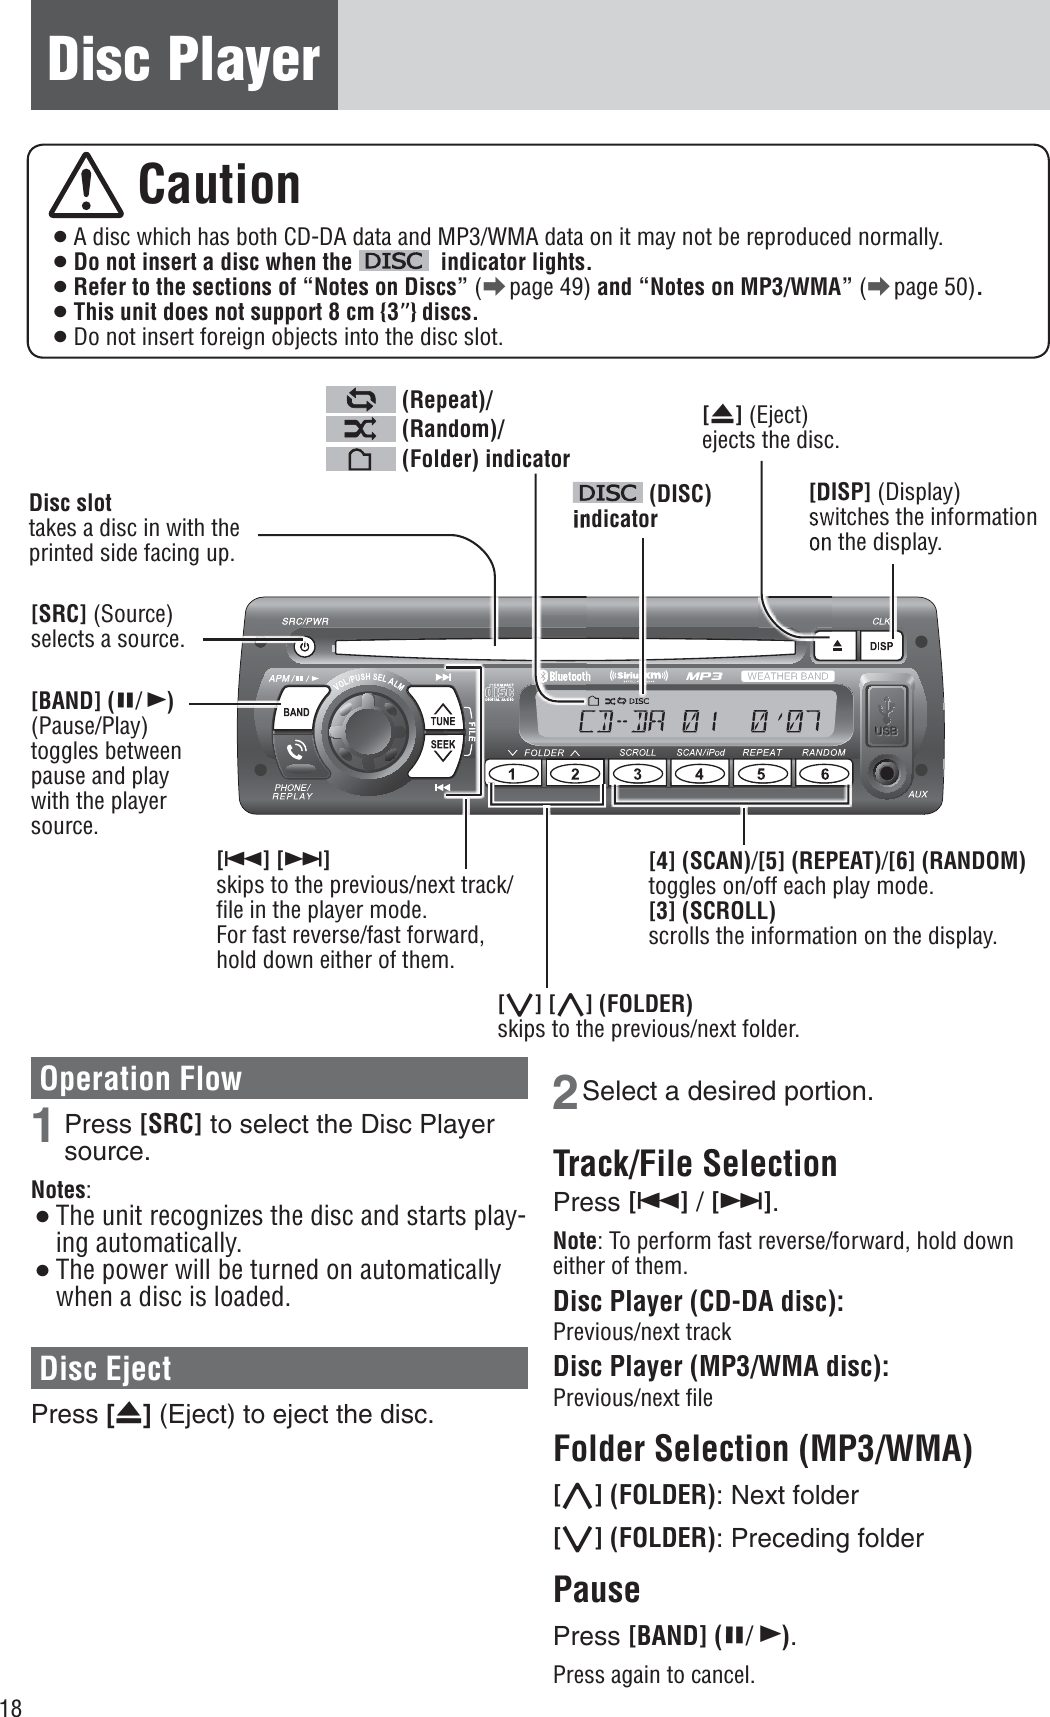 18Disc Player Caution¡ A disc which has both CD-DA data and MP3/WMA data on it may not be reproduced normally. ¡Do not insert a disc when the   indicator lights.¡Refer to the sections of “Notes on Discs” (a page 49) and “Notes on MP3/WMA” (a page 50).¡This unit does not support 8 cm {3”} discs.¡ Do not insert foreign objects into the disc slot. [4] (SCAN)/[5] (REPEAT)/[6] (RANDOM)toggles on/off each play mode. [3] (SCROLL)scrolls the information on the display. Disc slot takes a disc in with the printed side facing up. [u] (Eject) ejects the disc. [SRC] (Source) selects a source. [BAND] (h/5)(Pause/Play)toggles between pause and play with the player source. [6] [7]skips to the previous/next track/ﬁ le in the player mode. For fast reverse/fast forward, hold down either of them. (DISC) indicator (Repeat)/ (Random)/ (Folder) indicatorOperation Flow 1 Press [SRC] to select the Disc Player source.Notes:¡The unit recognizes the disc and starts play-ing automatically.¡The power will be turned on automatically when a disc is loaded.Disc Eject Press [u] (Eject) to eject the disc.2 Select a desired portion.Track/File Selection Press [6] / [7].Note: To perform fast reverse/forward, hold down either of them. Disc Player (CD-DA disc): Previous/next track Disc Player (MP3/WMA disc): Previous/next ﬁ le Folder Selection (MP3/WMA) [}] (FOLDER): Next folder [{] (FOLDER): Preceding folder PausePress [BAND] (h/5).Press again to cancel. [DISP] (Display) switches the information on the display. [{] [}] (FOLDER)skips to the previous/next folder. 